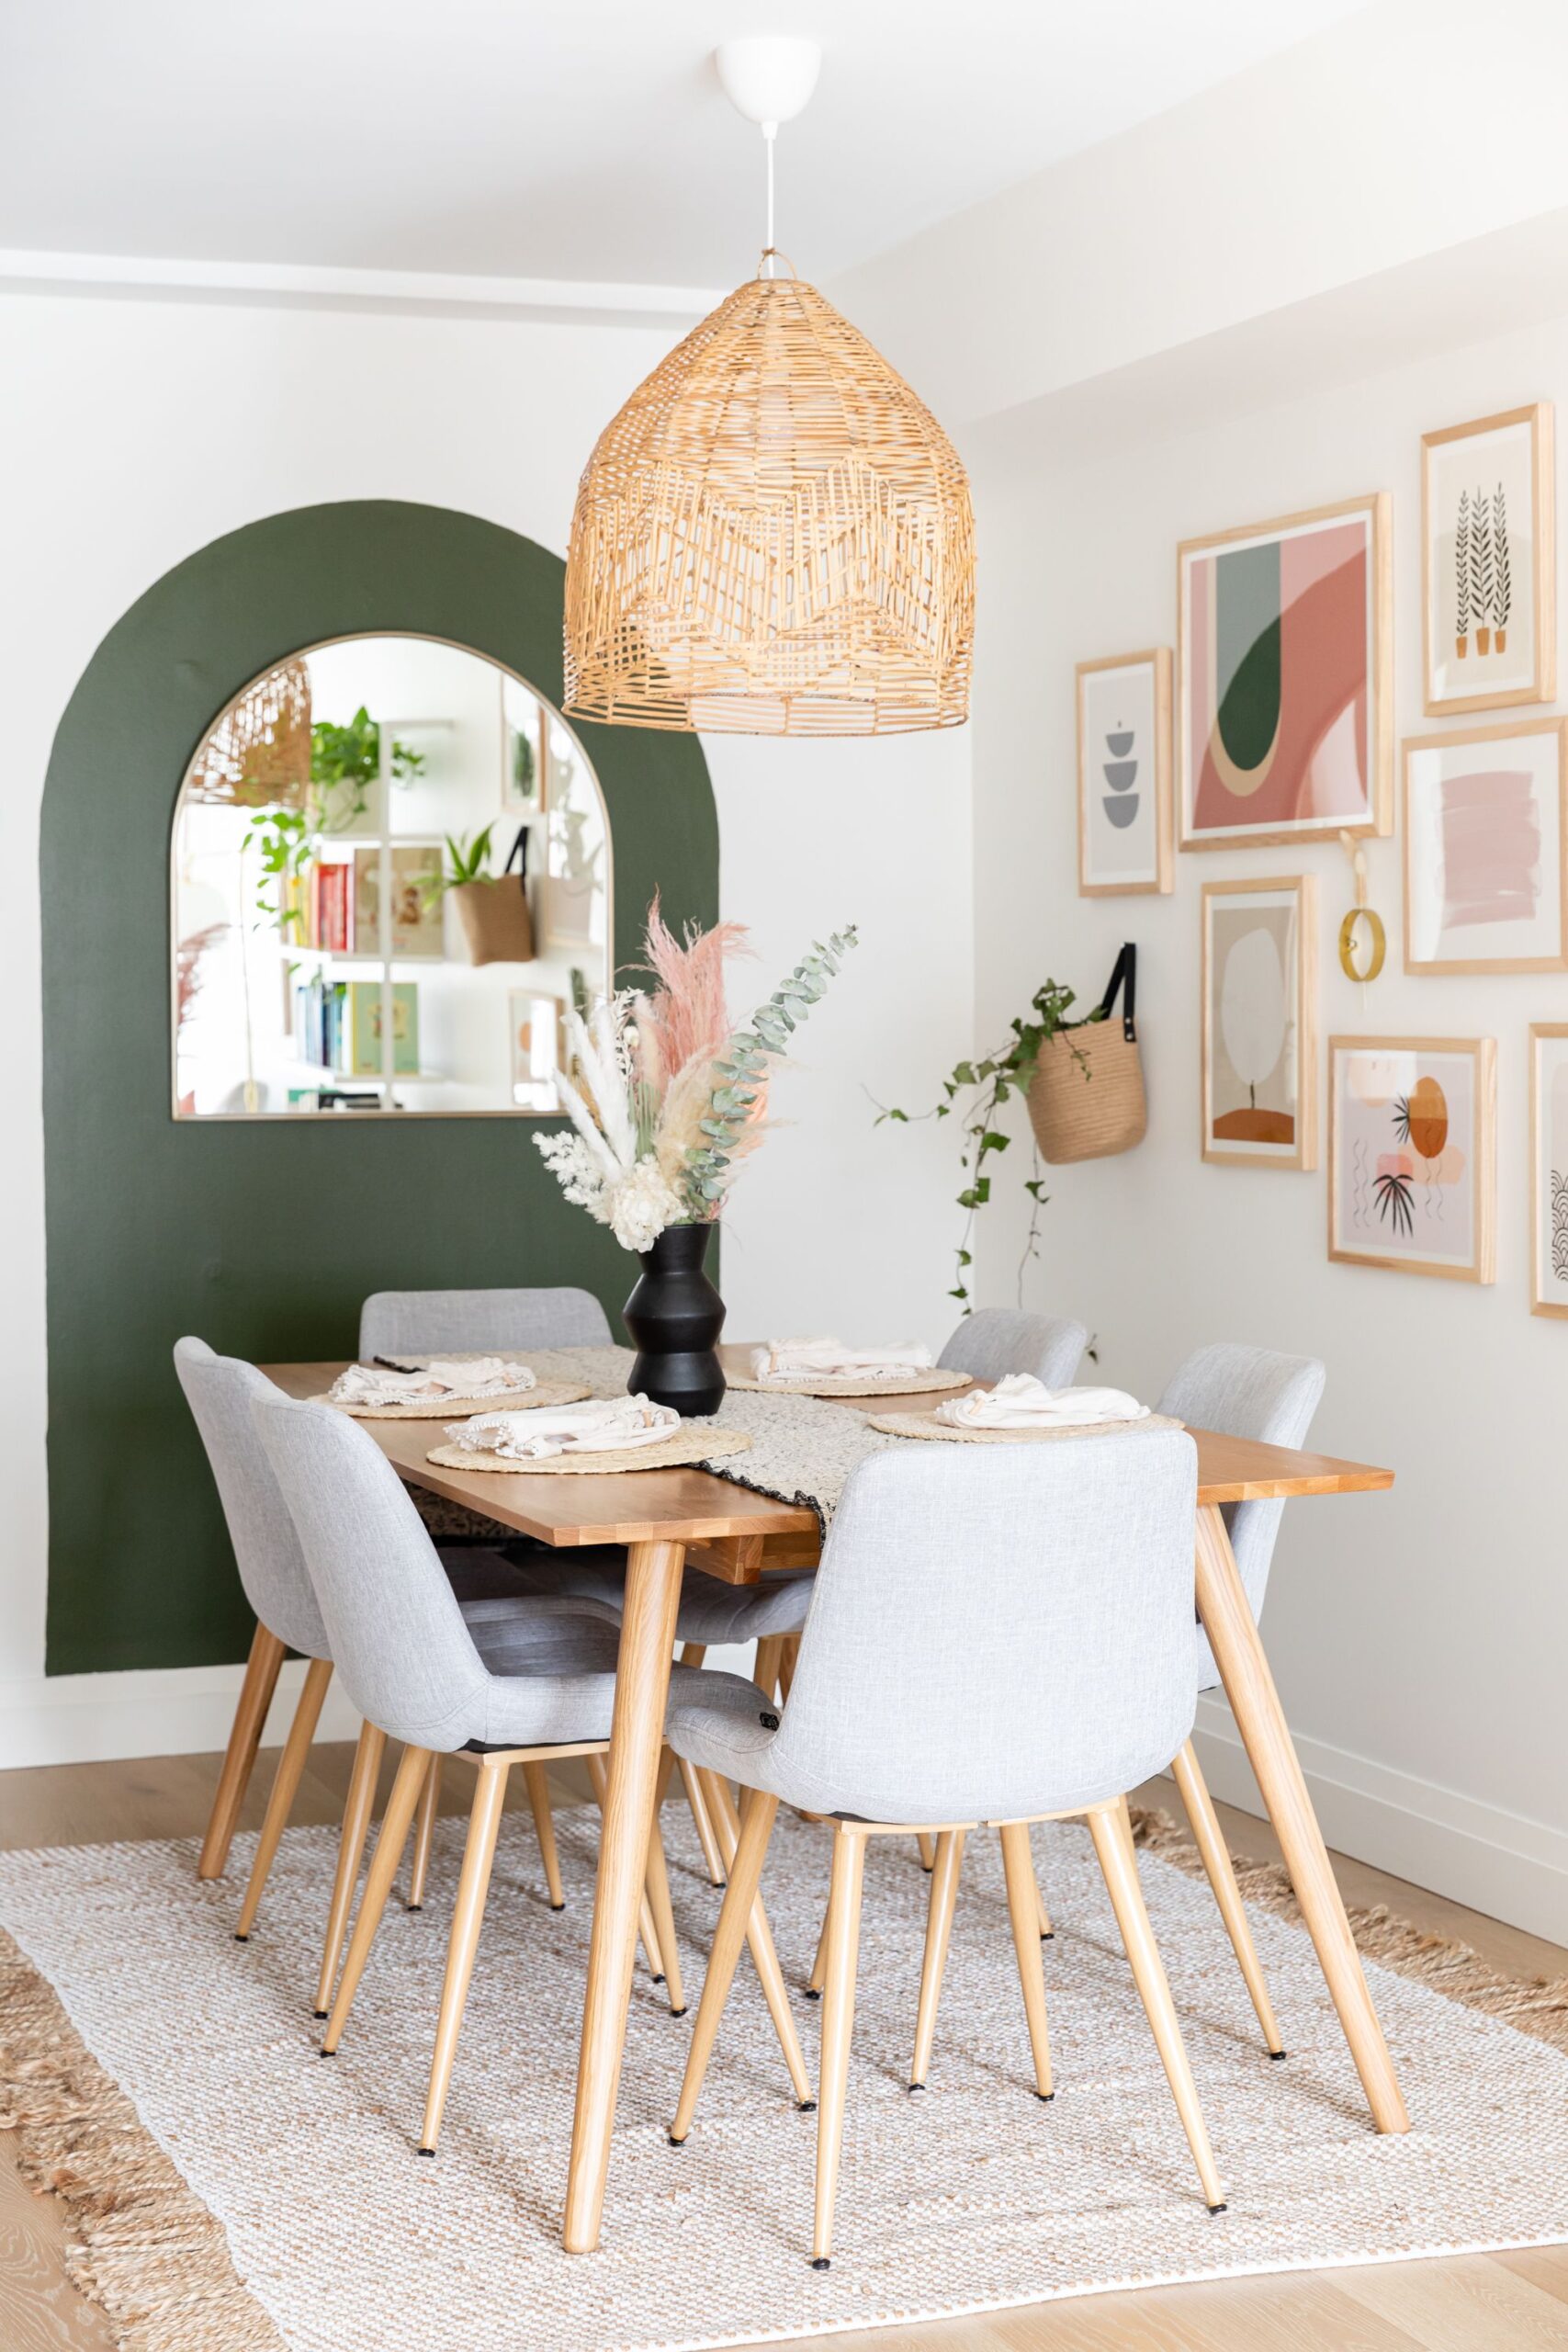 Small dining room ideas for the dream home